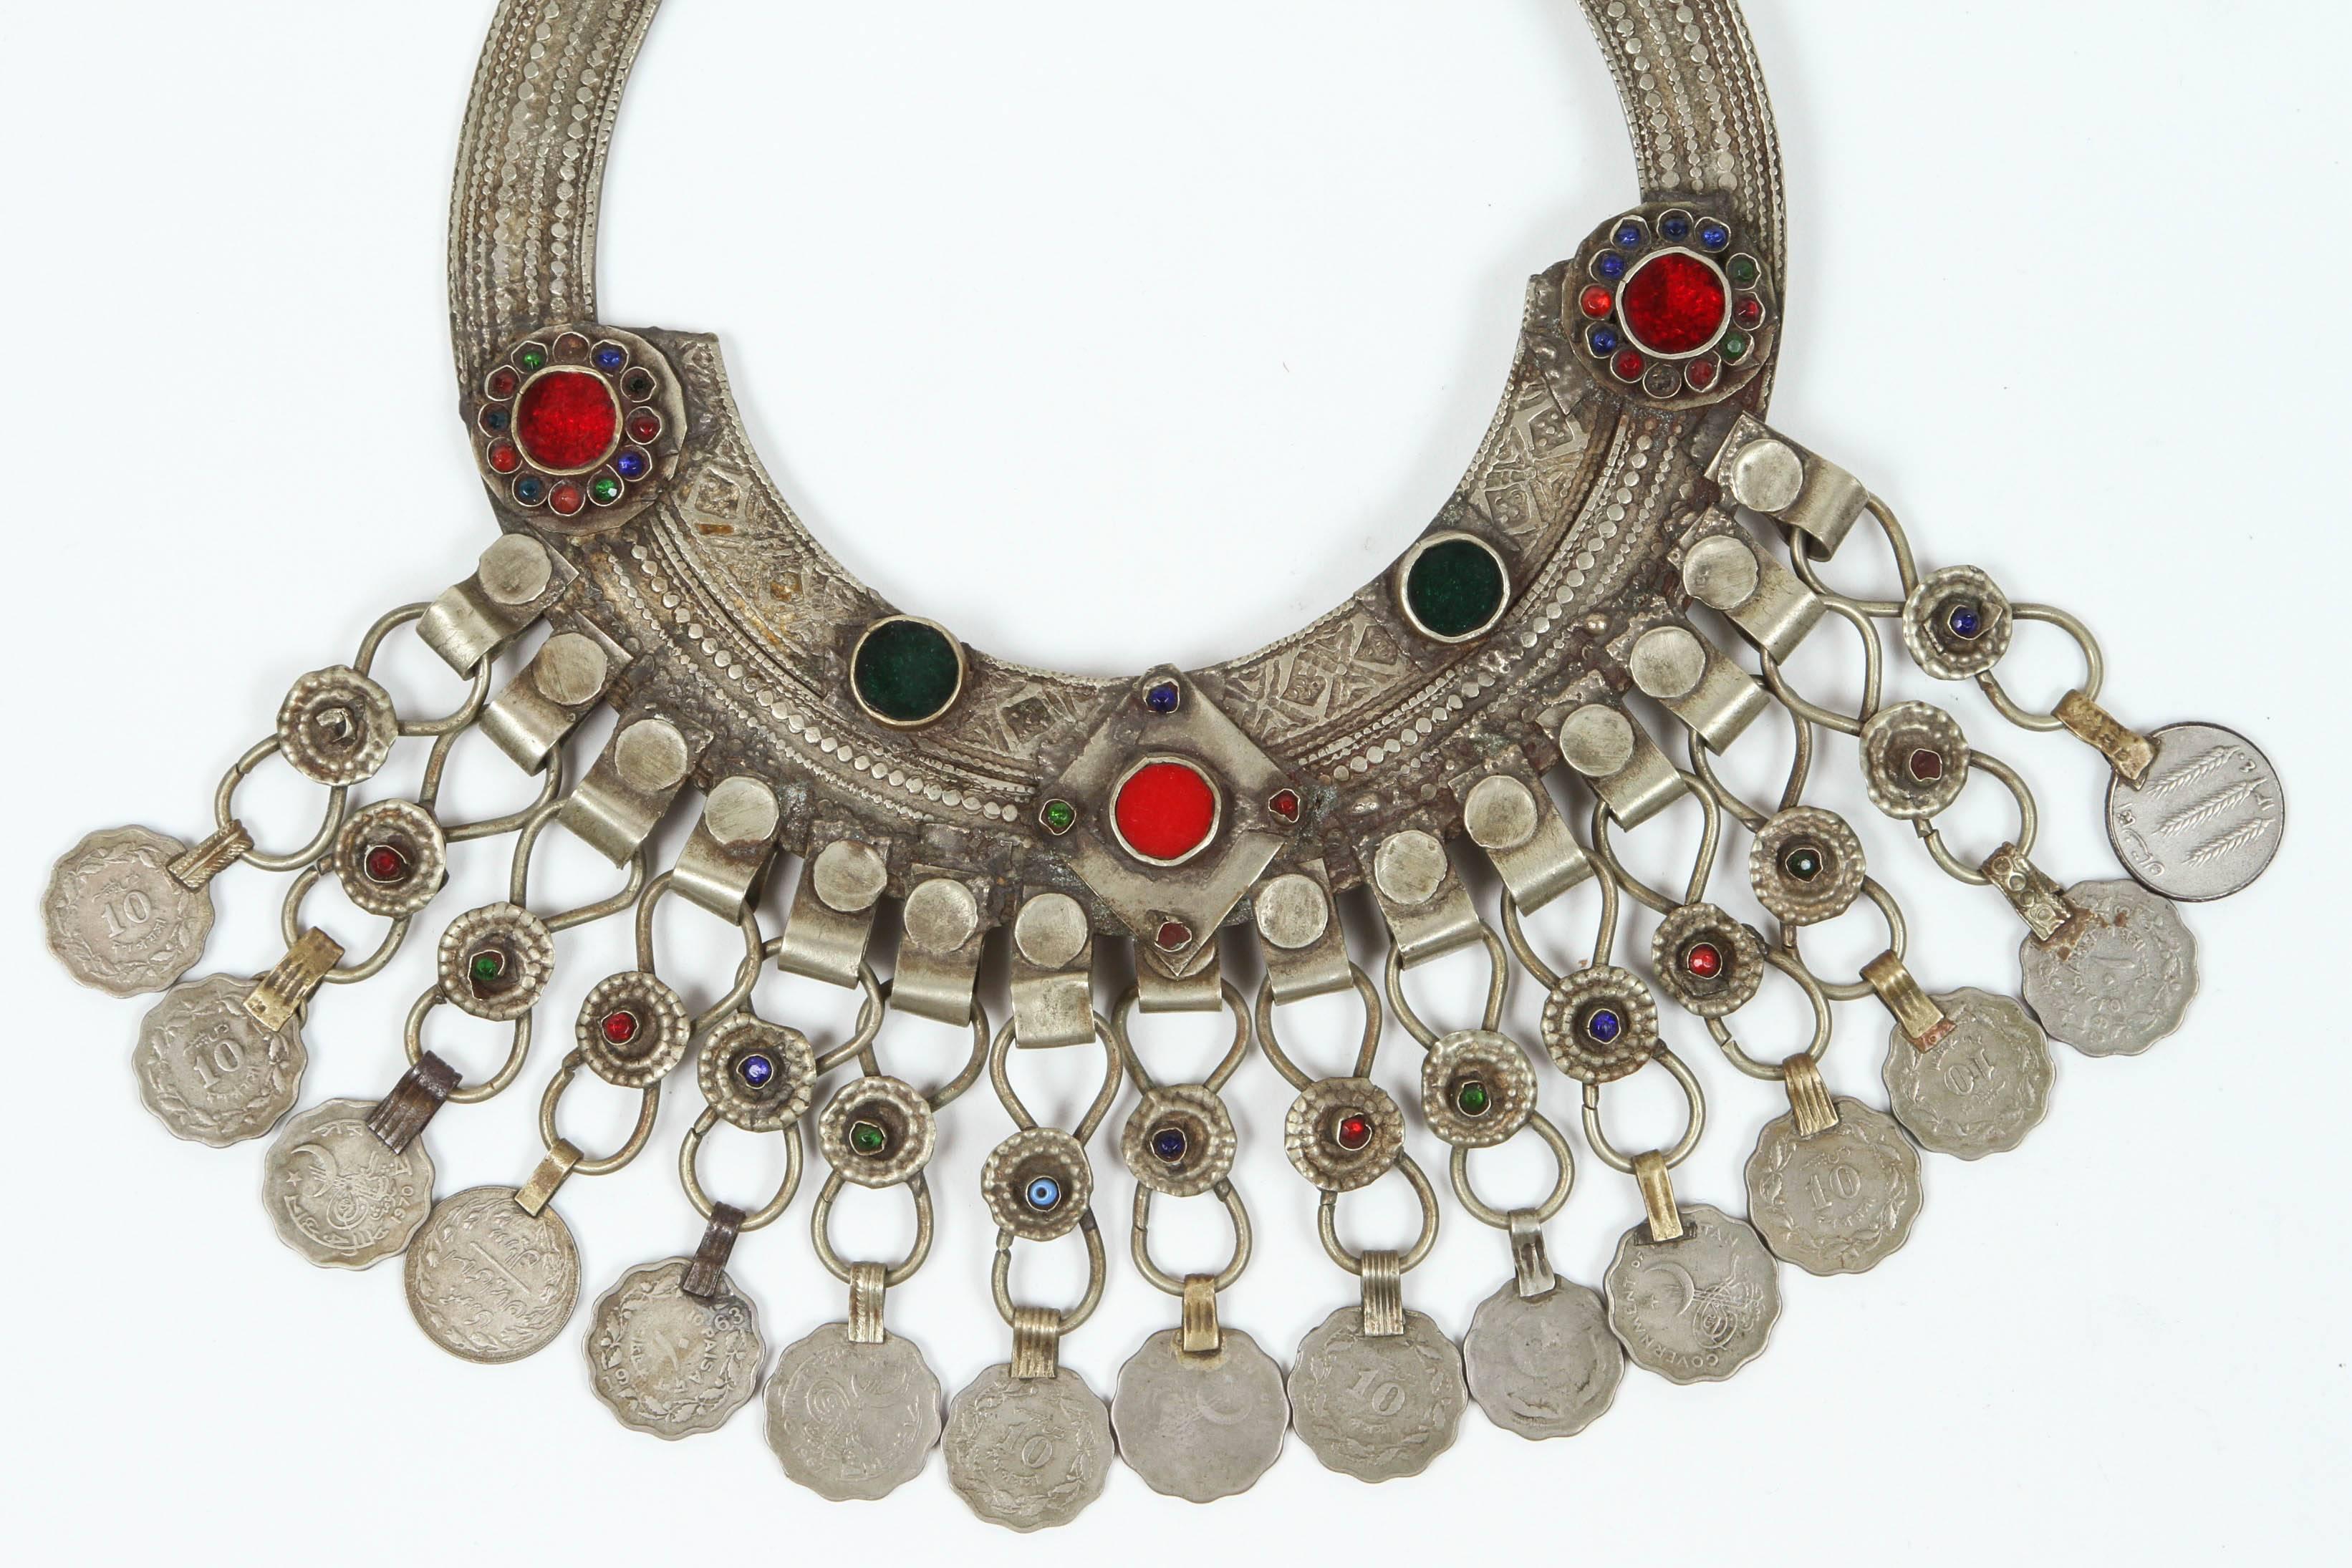 A Moroccan Tribal jewelry vintage a chocker inlaid with colorful glass beads in red and green and dangling coins. Silver, but not of the standard of sterling and richly embellished with applied silver designs and filigree. 
Chocker size: 10